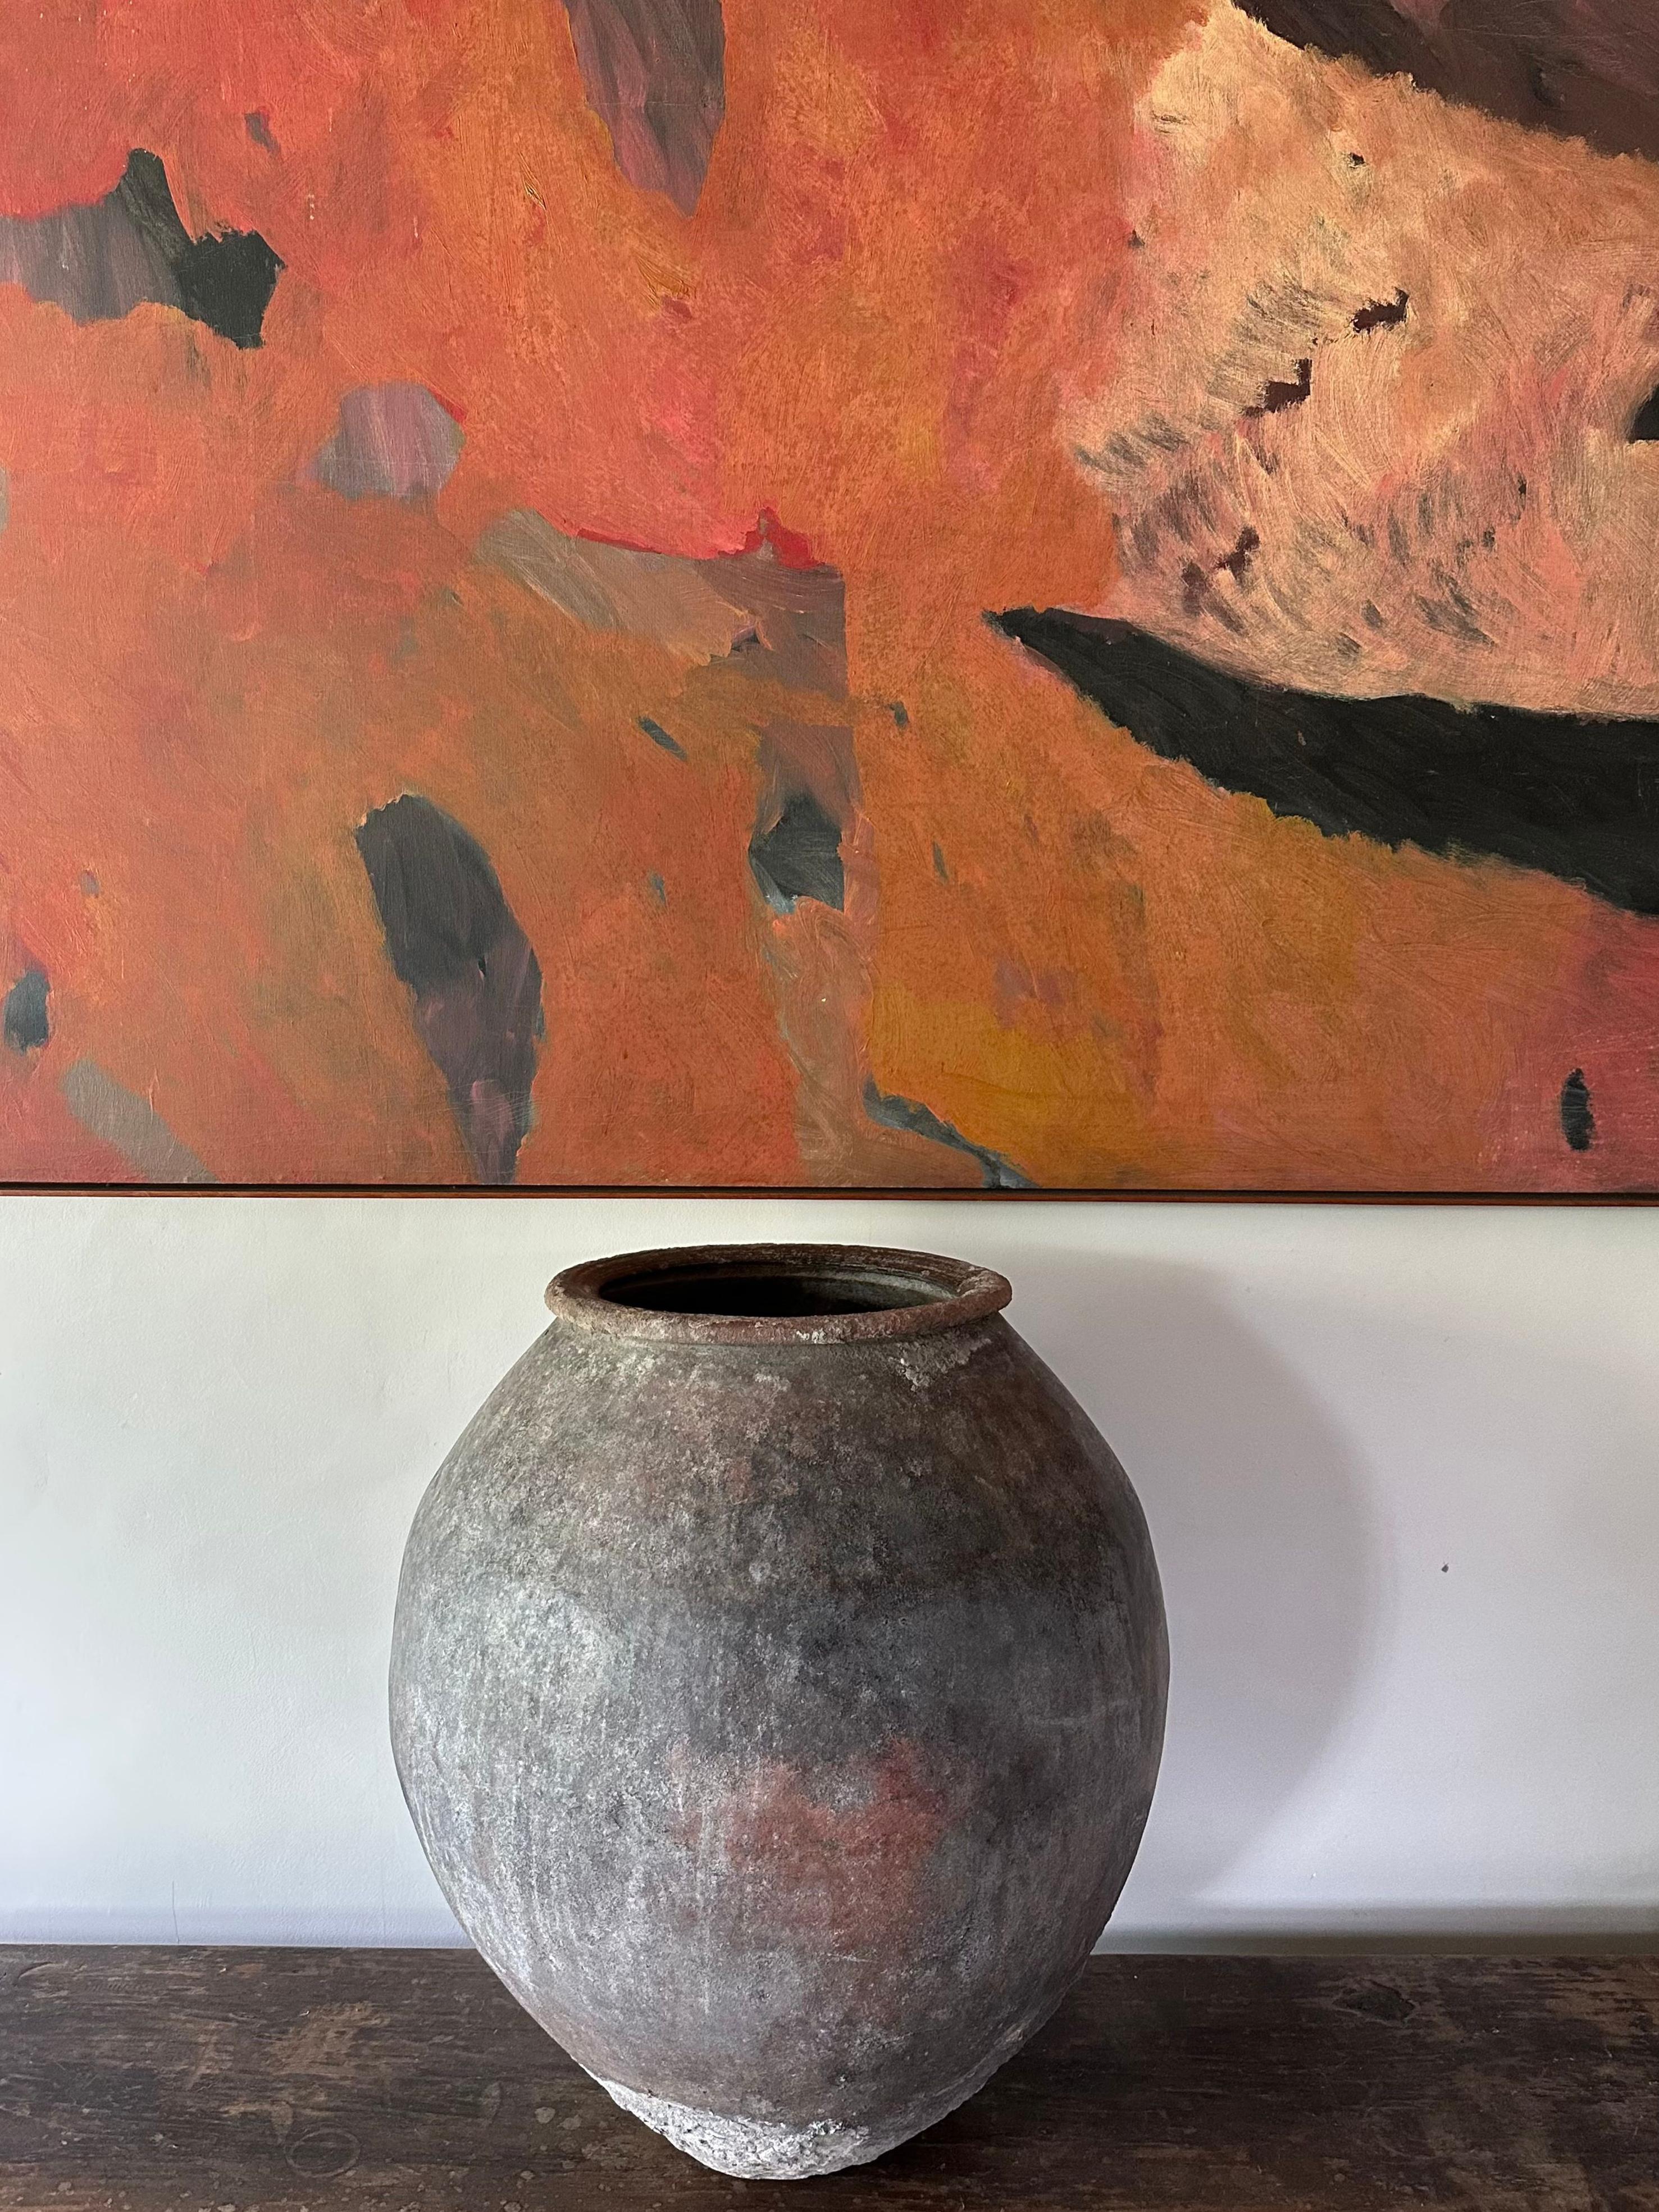 An antique terracotta water jar from Java, Indonesia. It has faded beautifully over the decades with a wonderful mix of textures and shades. The age related patina present on all sides adds to its charm. The perfect object to bring warmth and